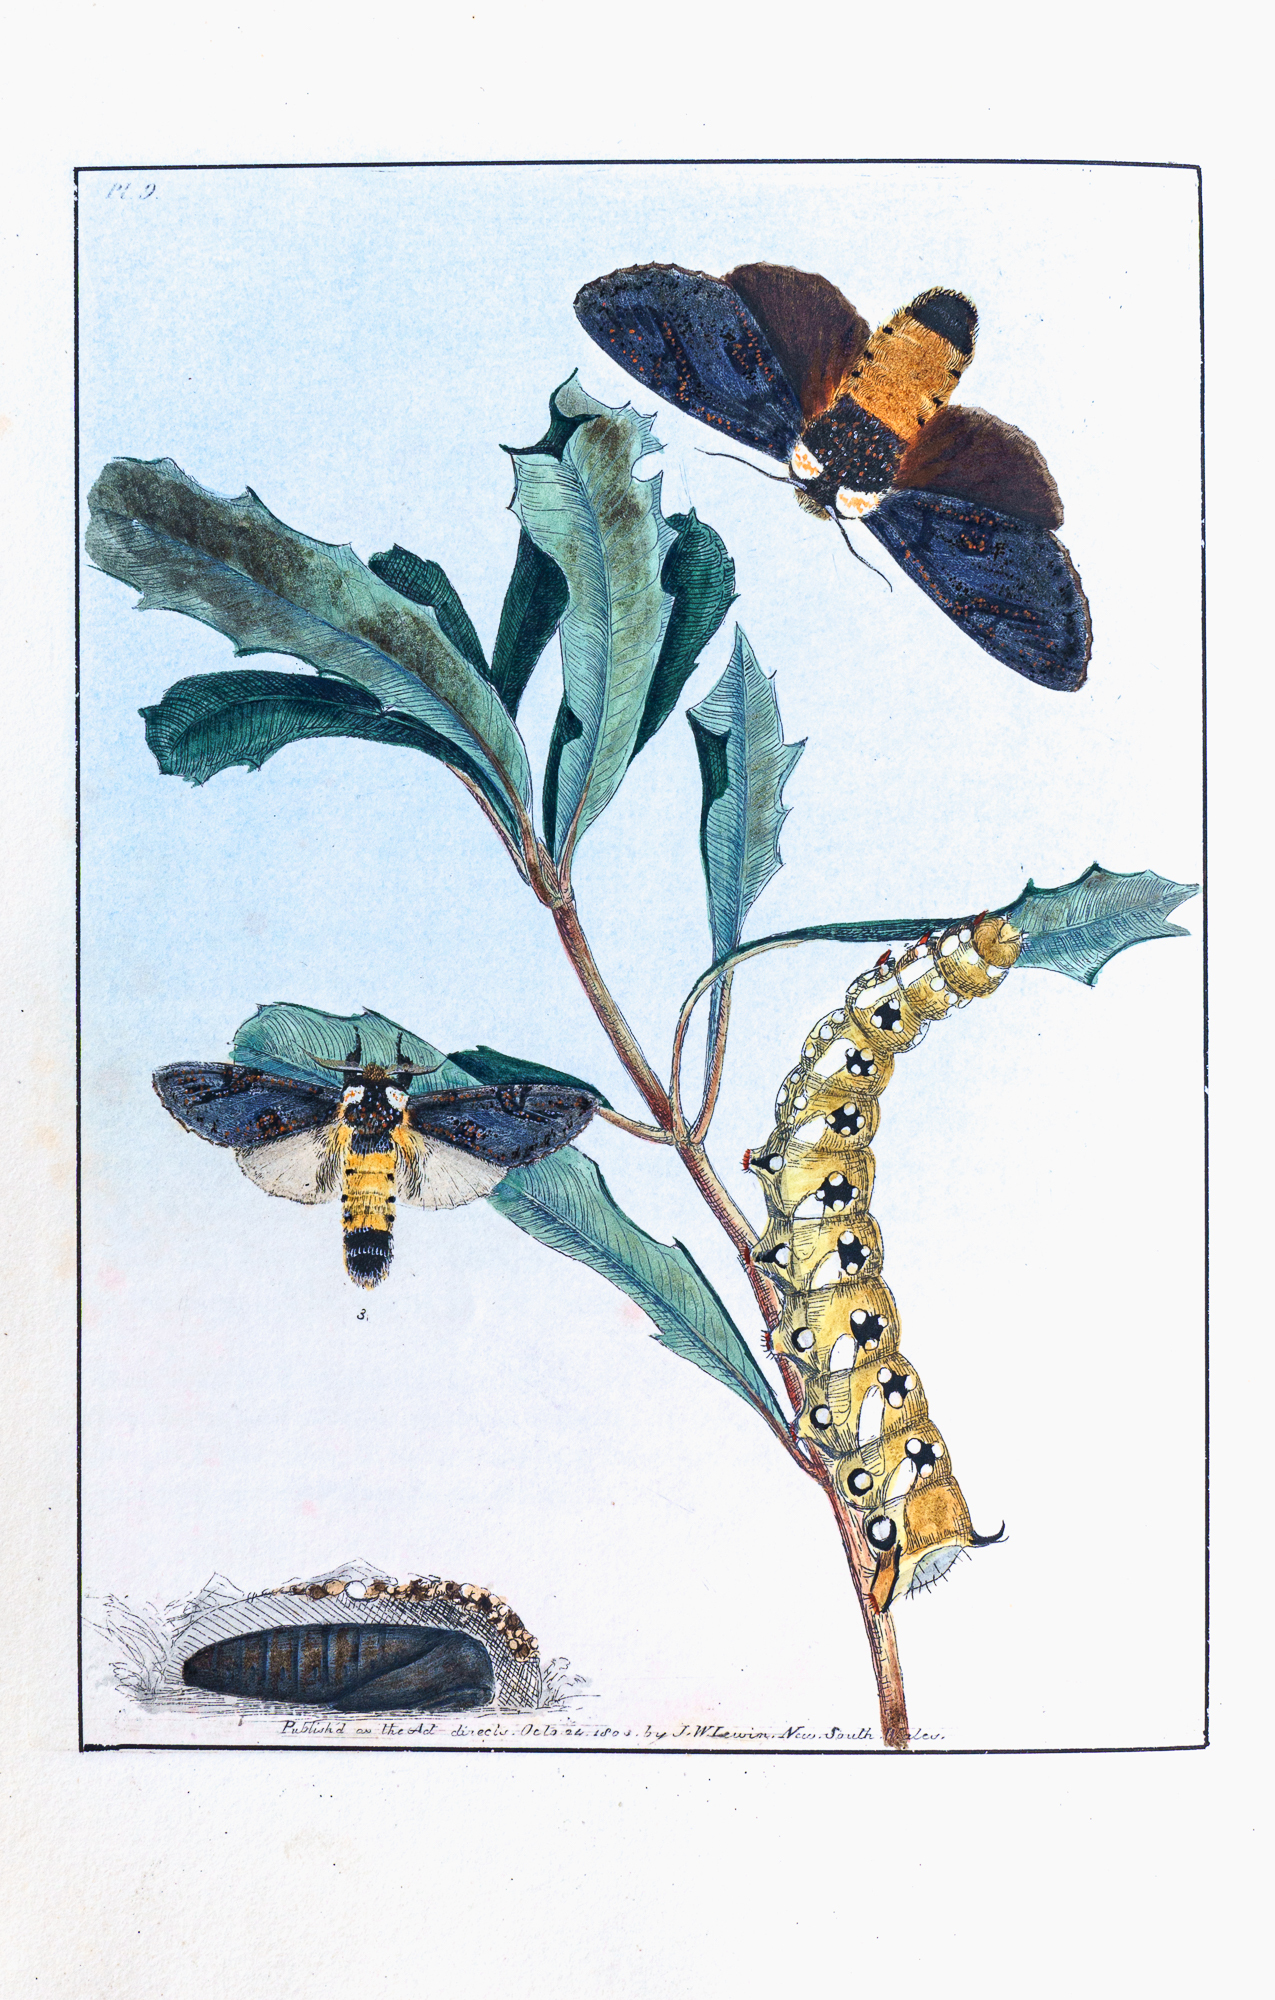 Lewin's Insects